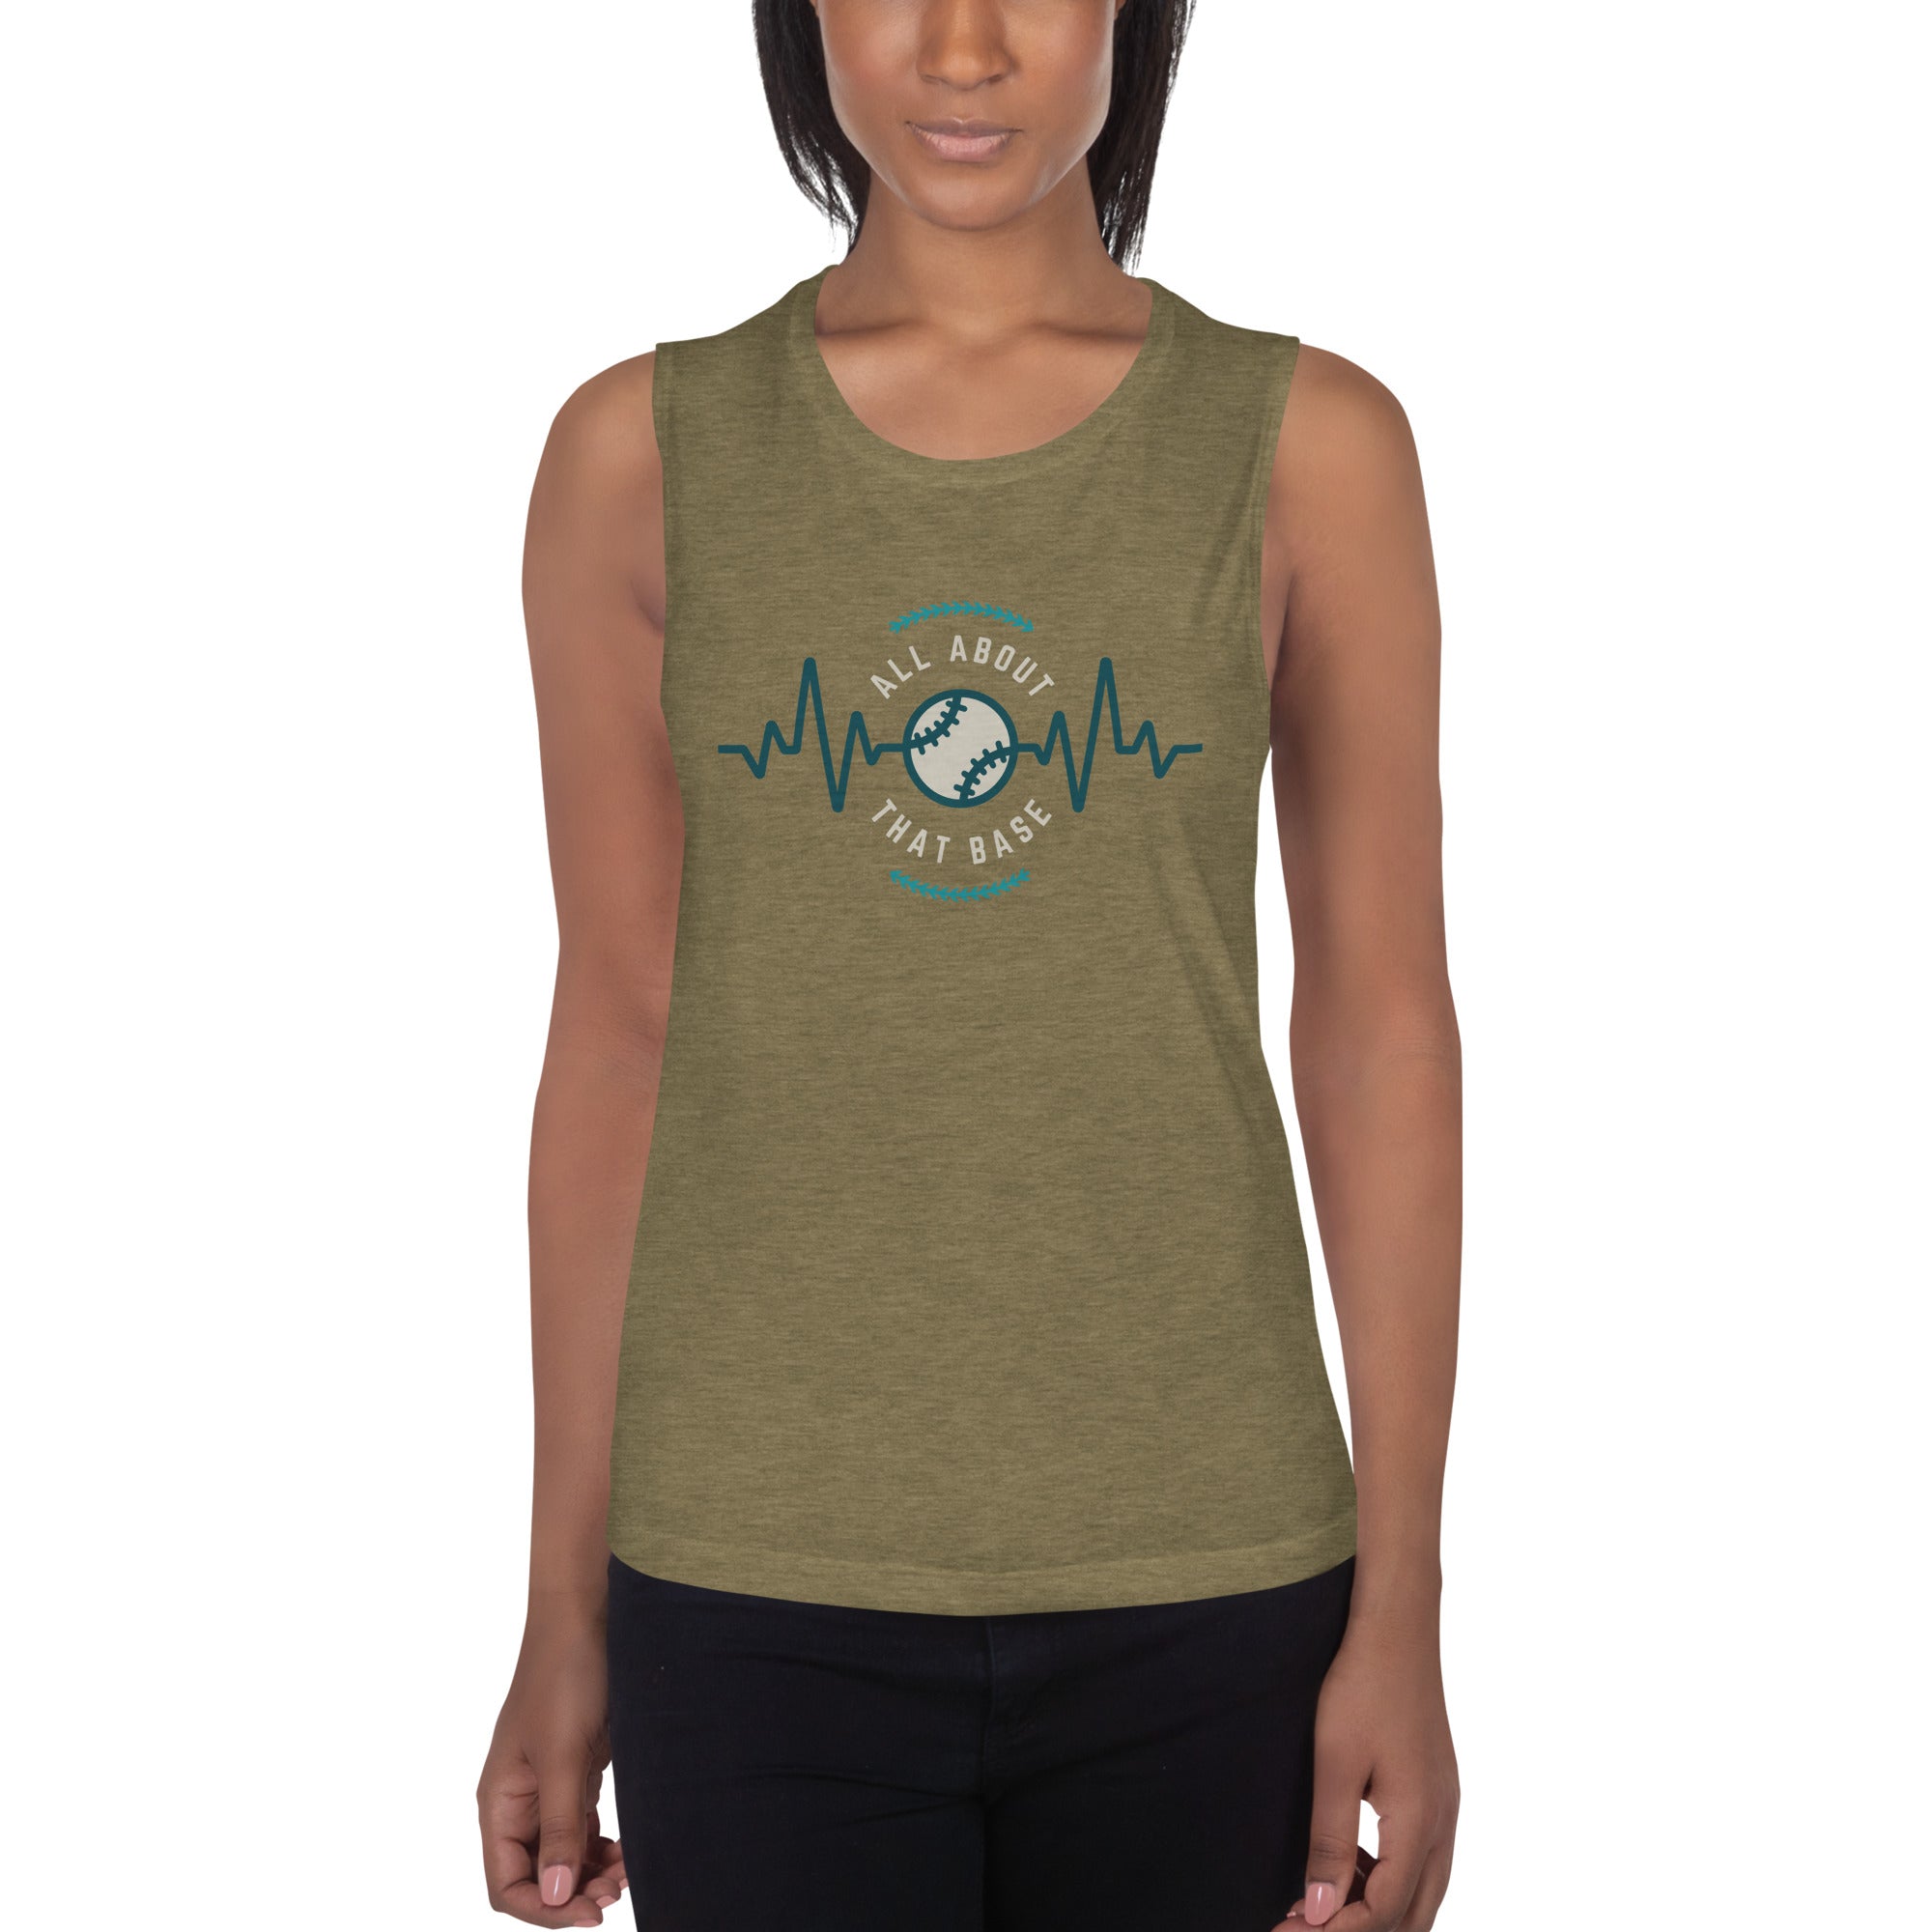 All About That Base Women's Muscle Tank